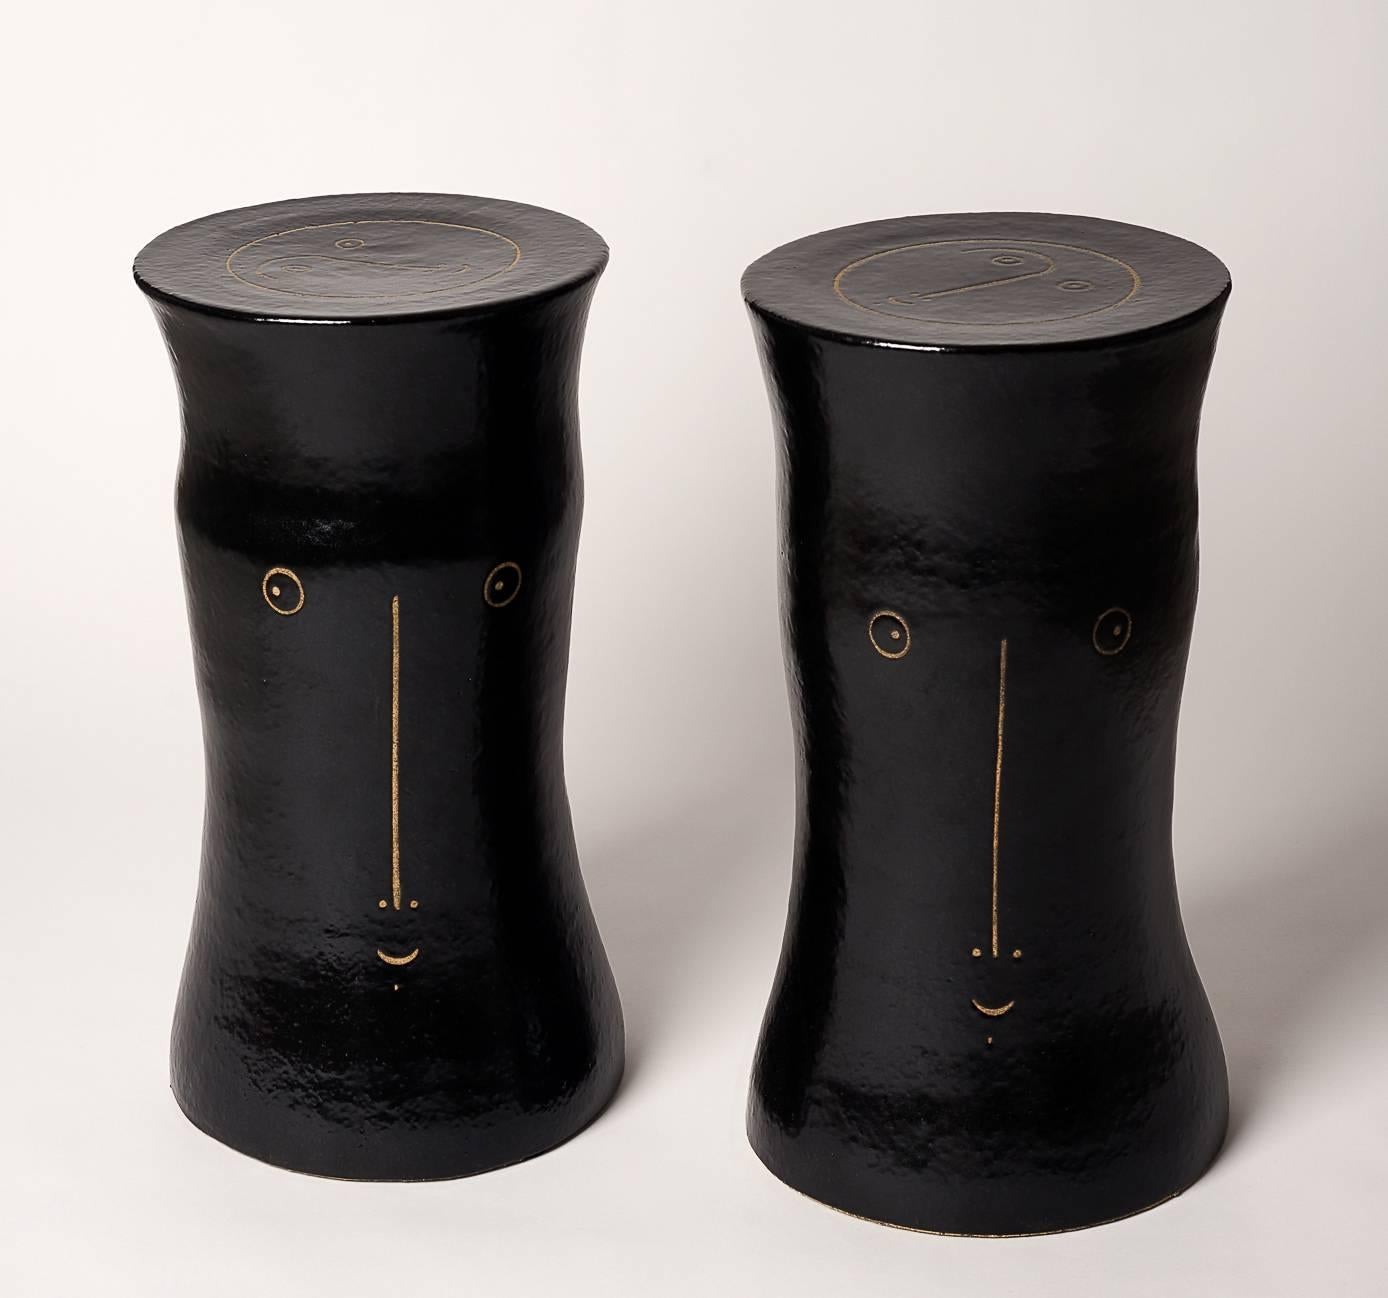 Pair of earthenware stools (or small coffee tables) with faces engraved, 2016.
Unique hand-sculpted piece, signed by the French ceramicists Dalo.